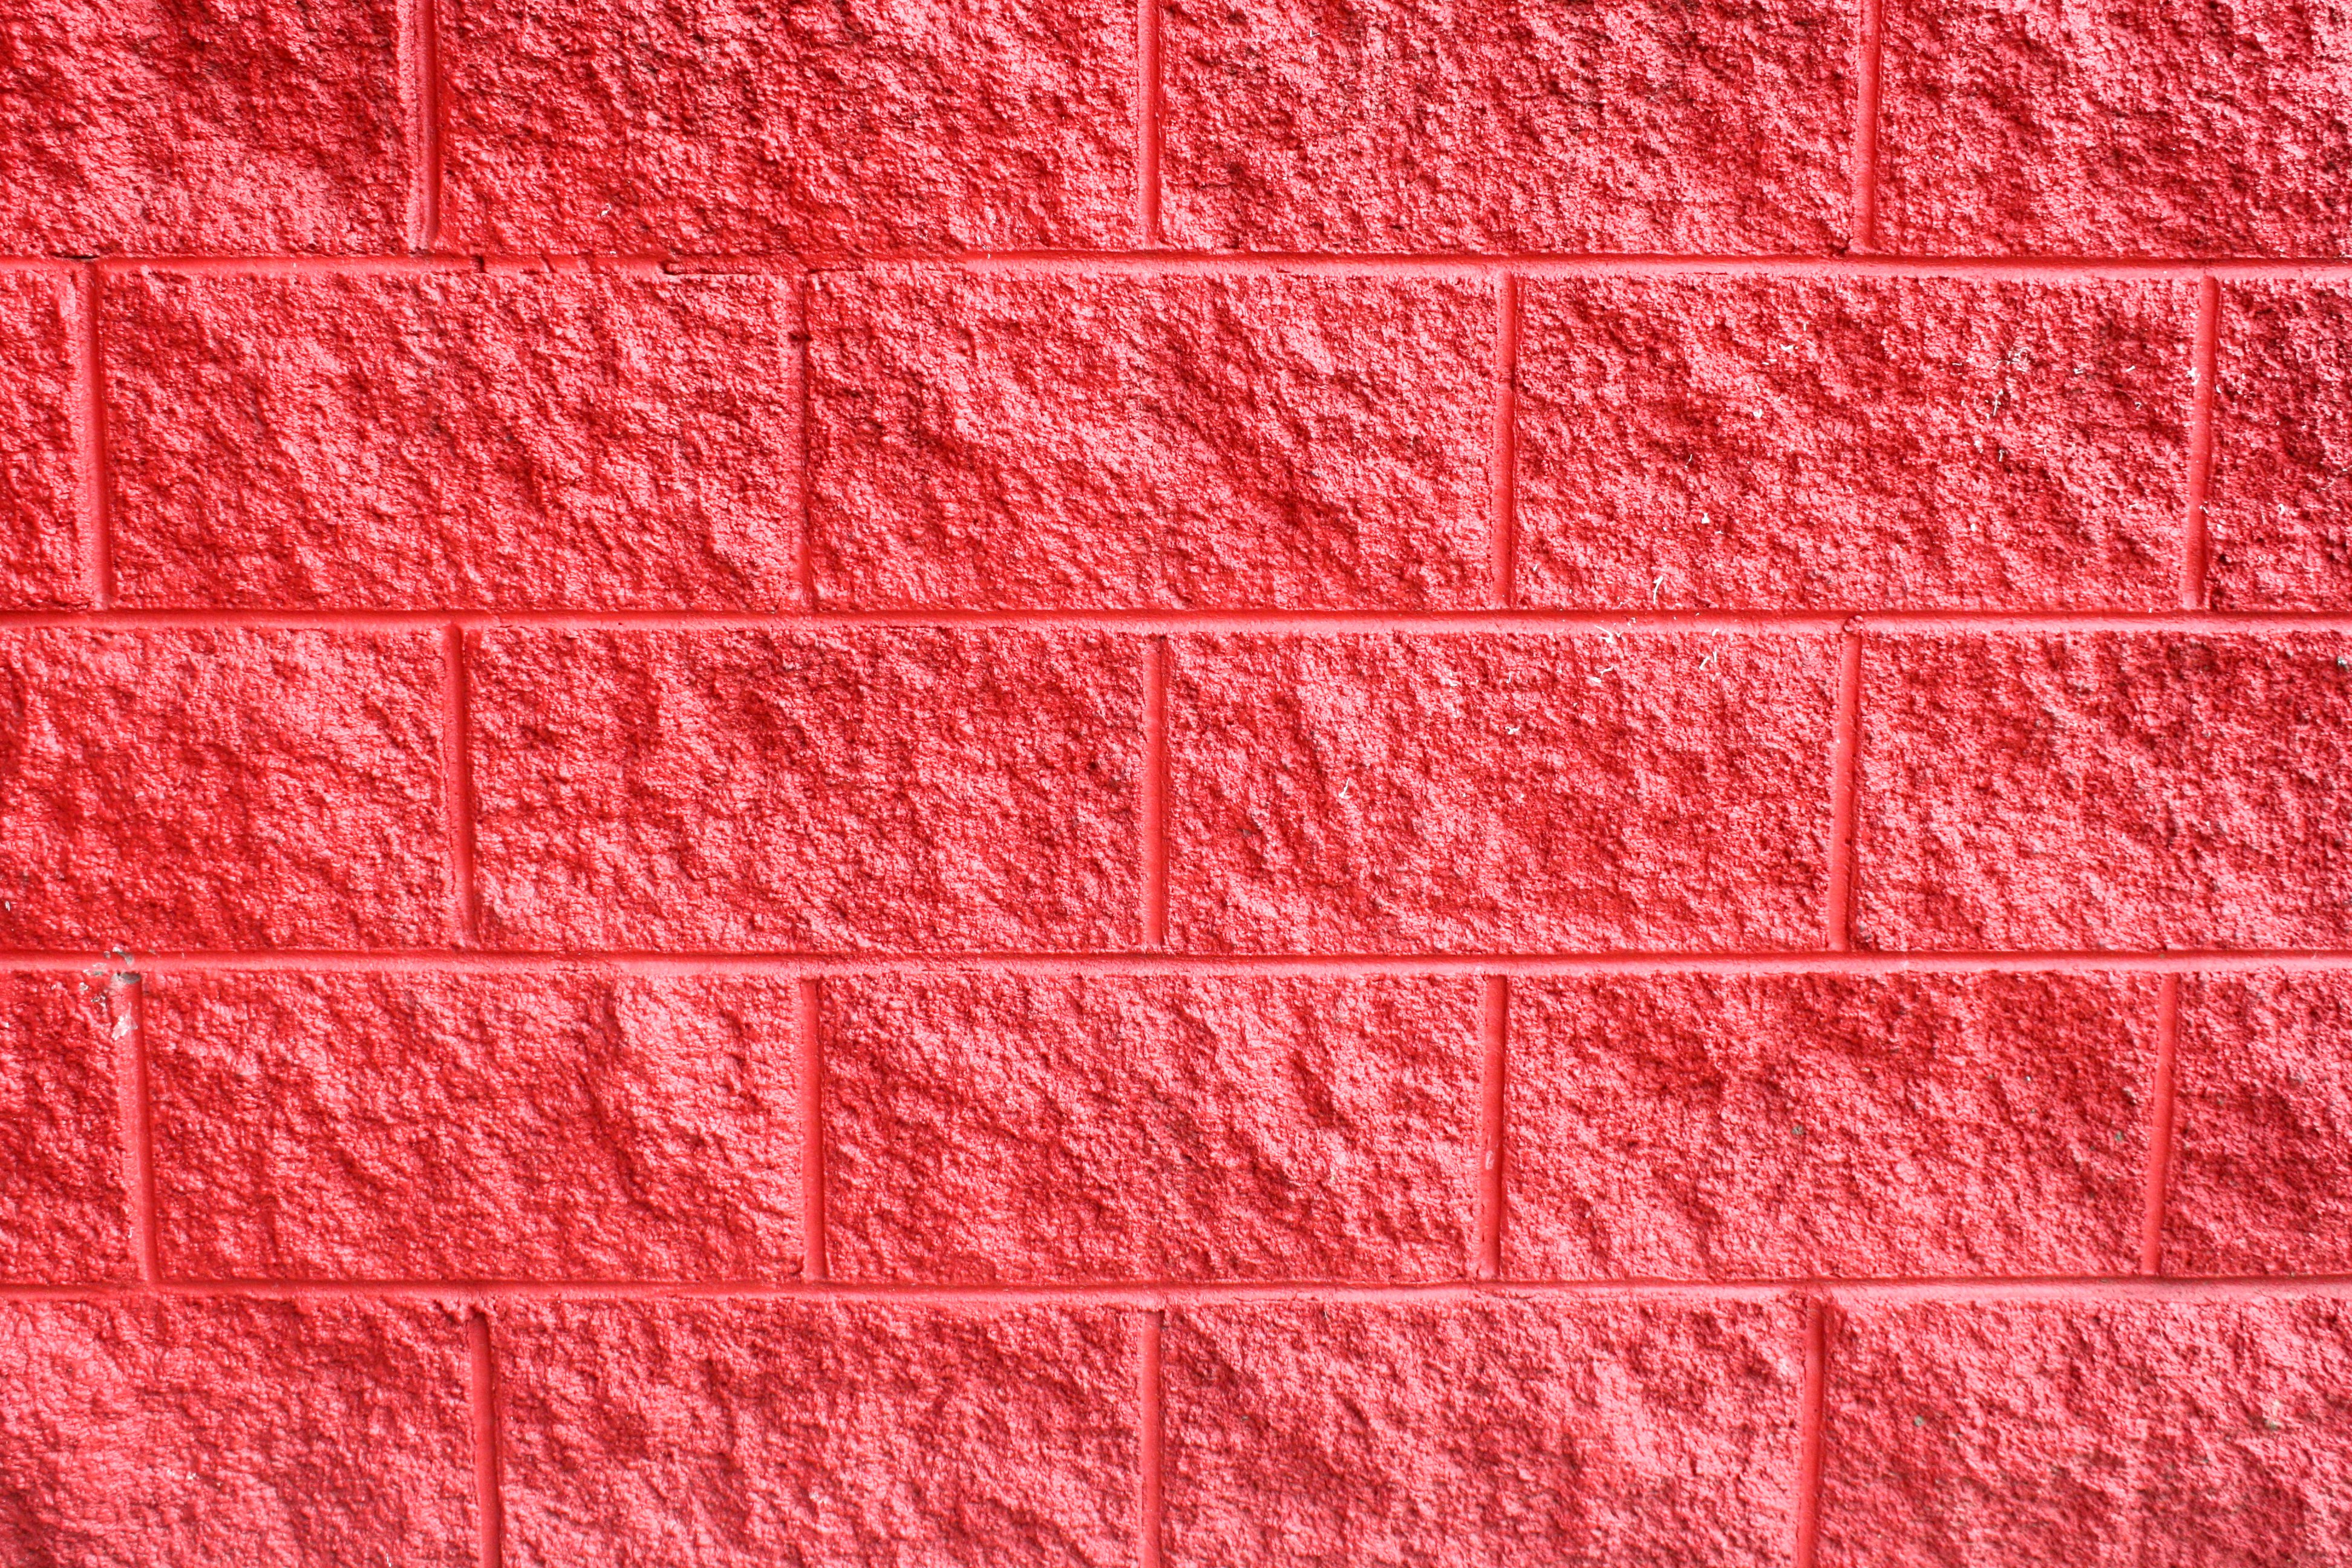 Painted Red Cinder Block Wall Texture Picture | Free Photograph